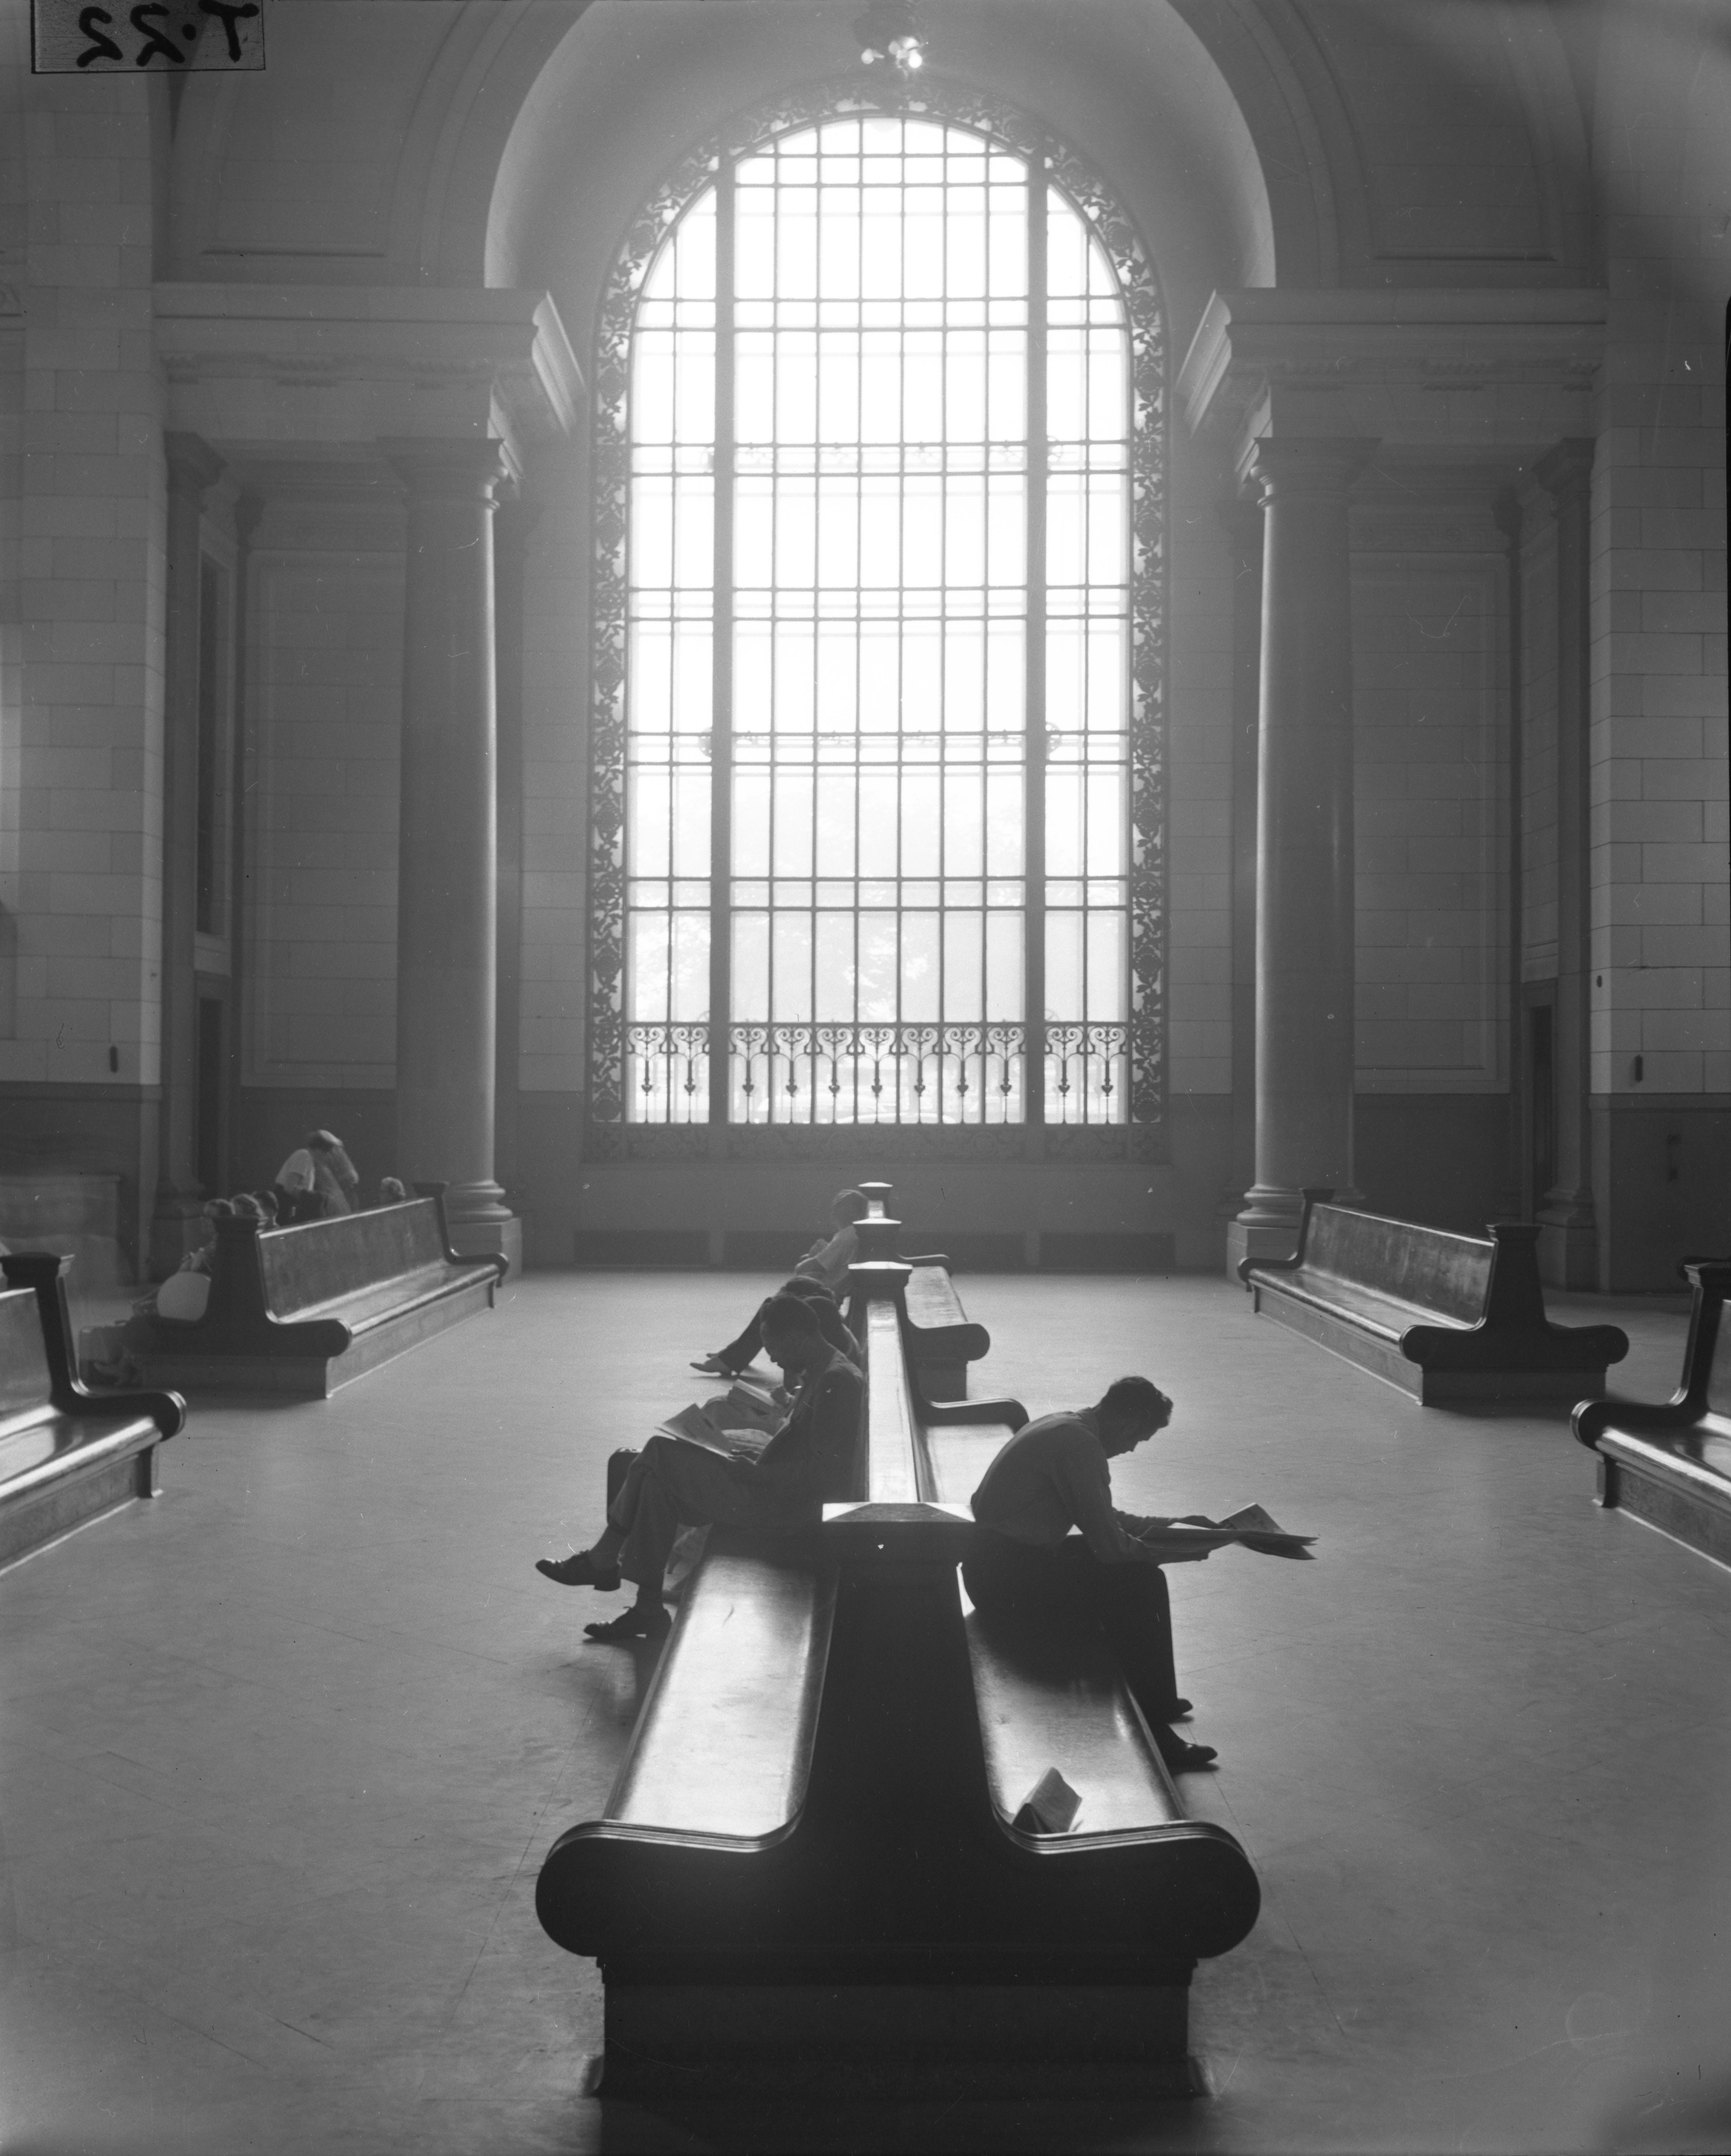 Michigan Central Station's waiting room had marble floors, bronze chandeliers, 68-foot Corinthian columns, and three arched 21-by-40 foot windows flanked by four smaller windows, according to Historic Detroit.